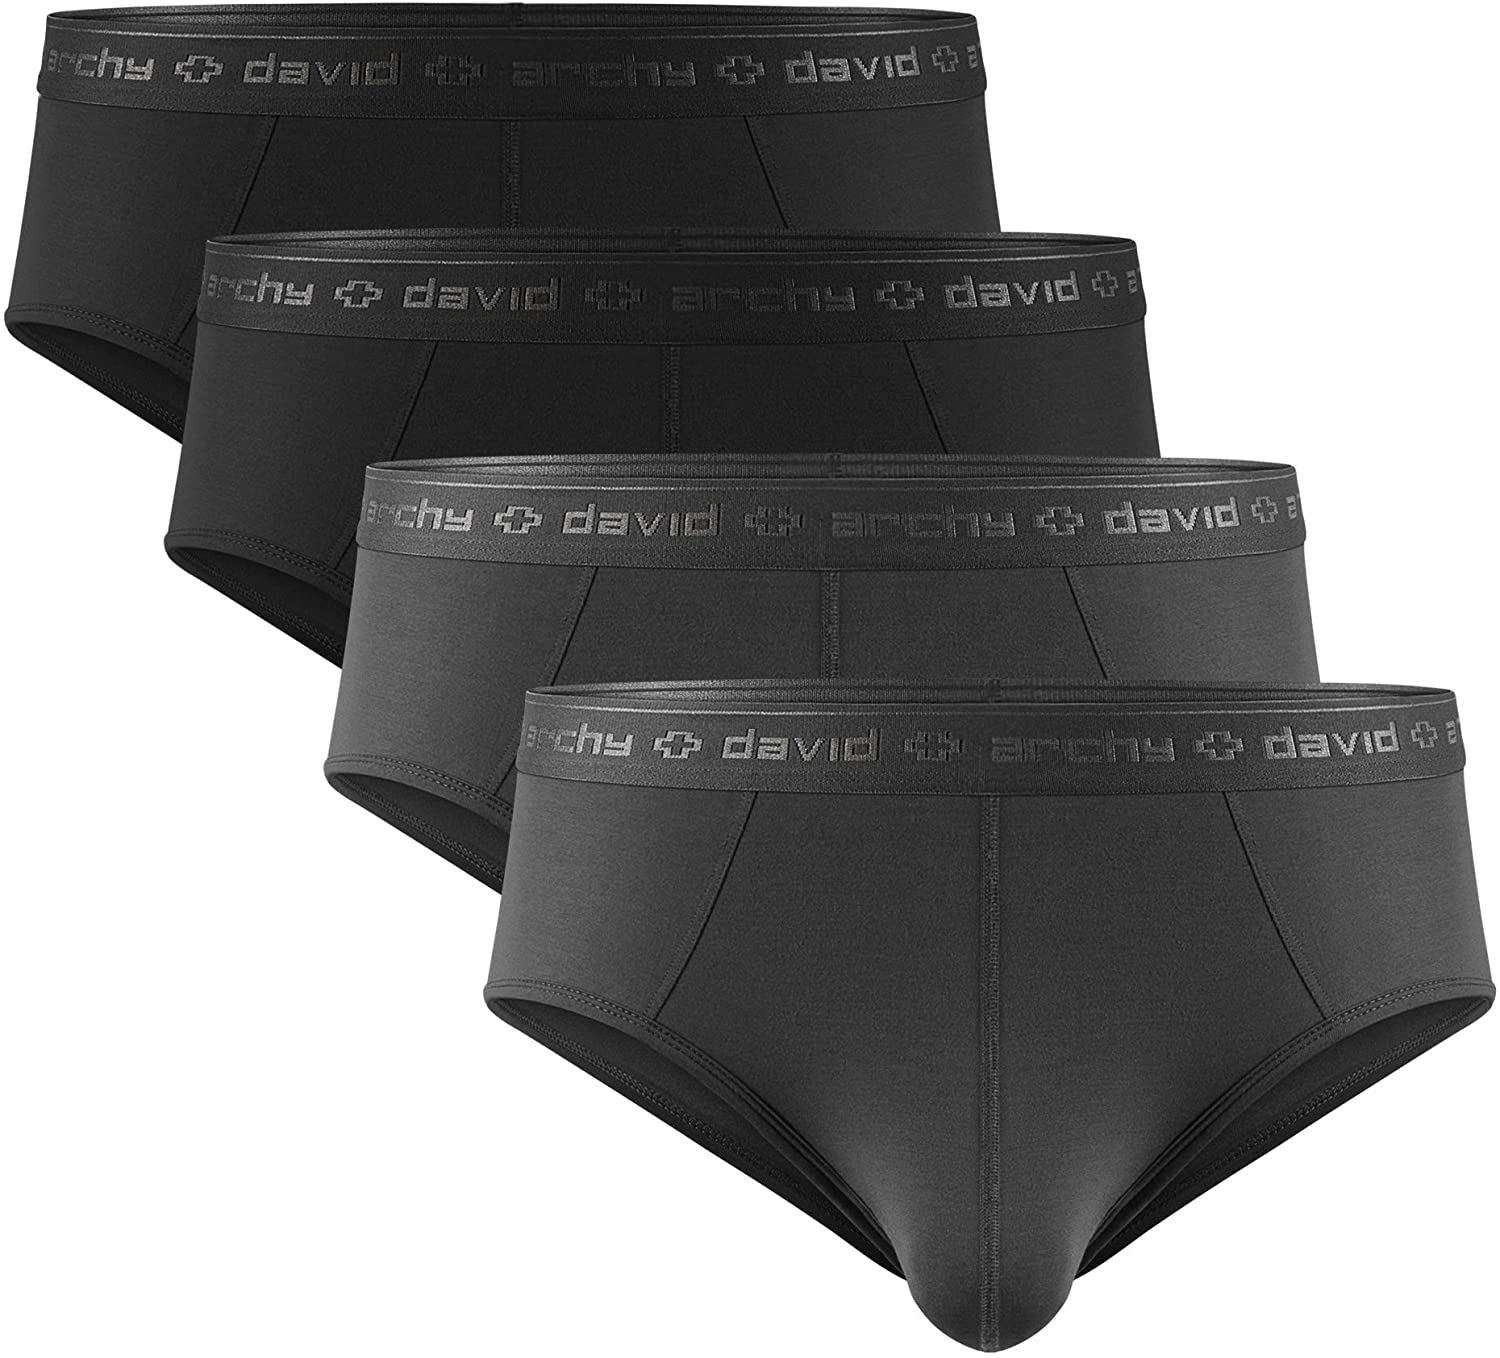 DAVID ARCHY Men's 4 Pack Micro Modal Separate Pouch Briefs with